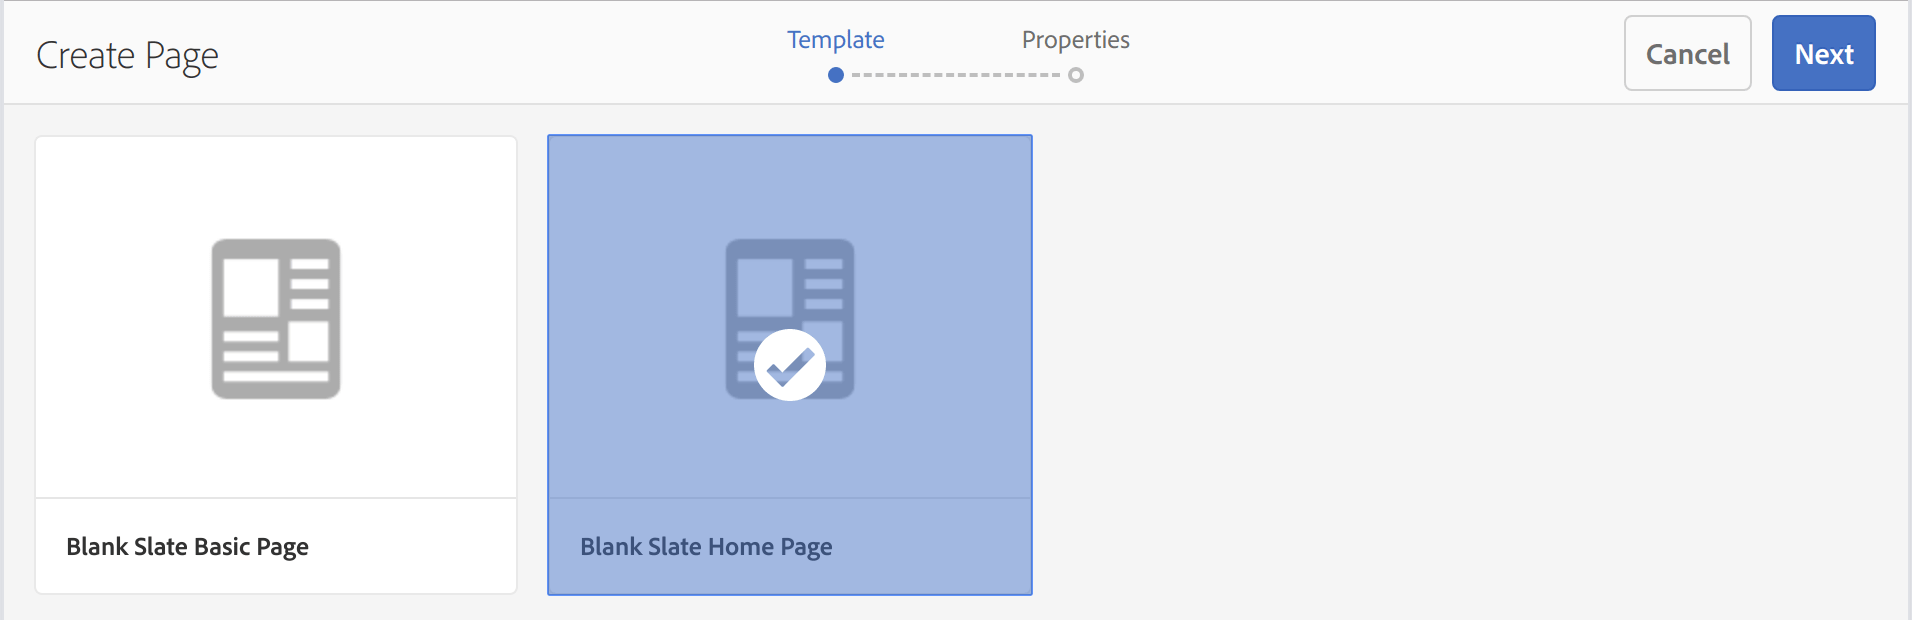 AEM Sites | Create > Page > Home Page Template